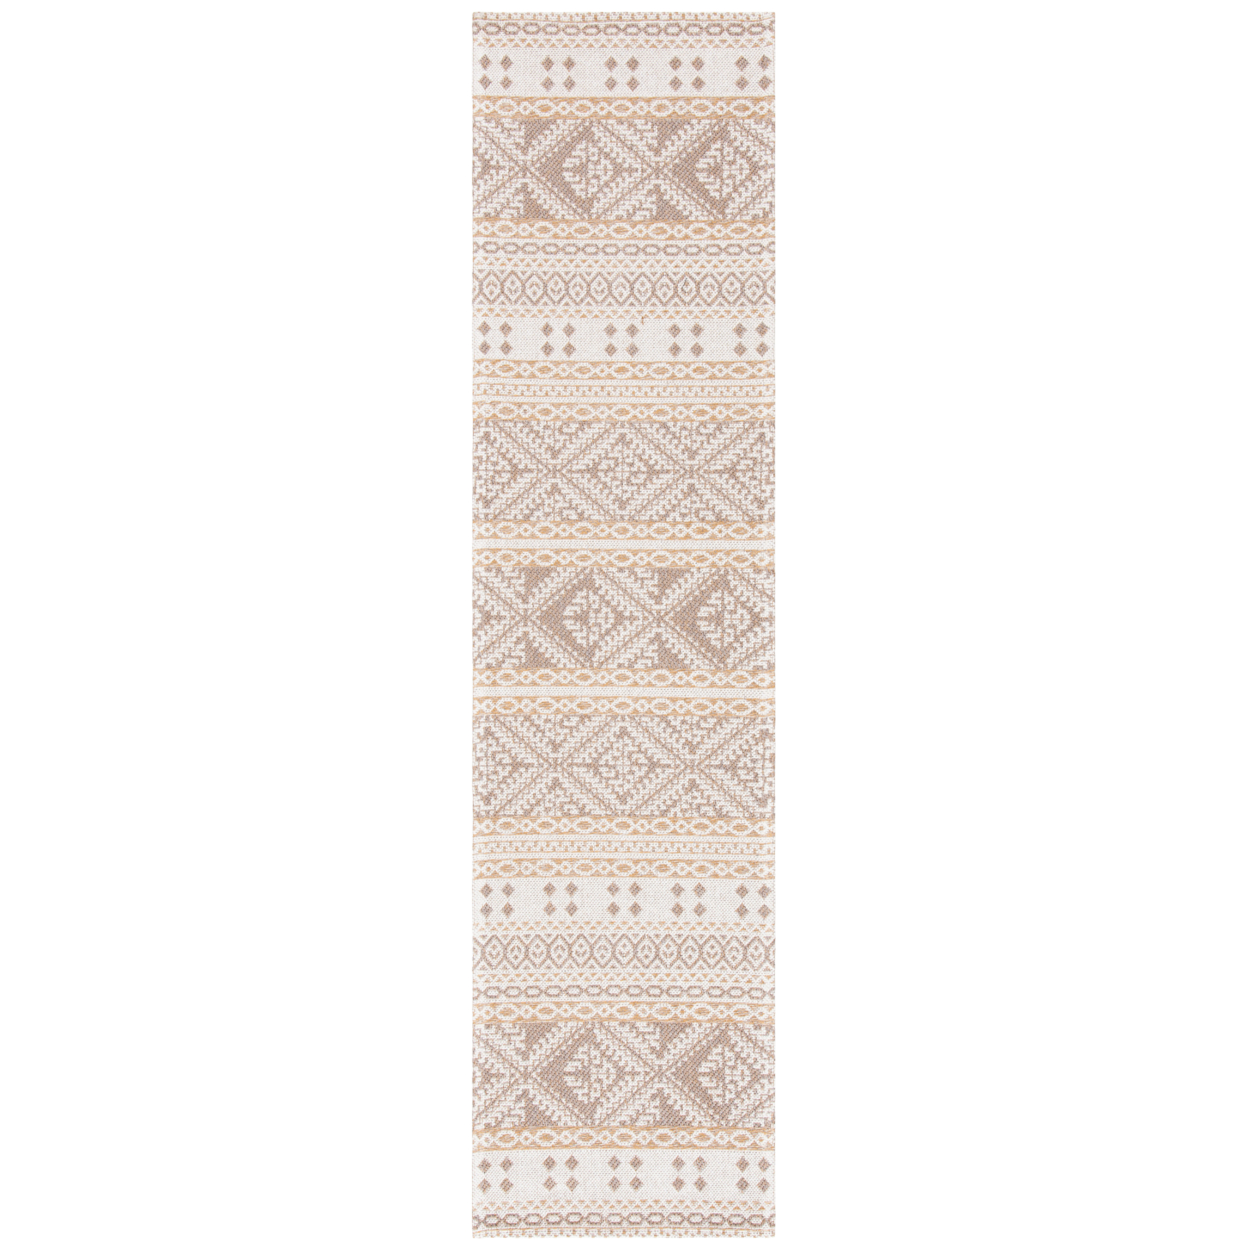 SAFAVIEH Augustine Collection AGT445E Taupe / Cream Rug - 2' X 8'